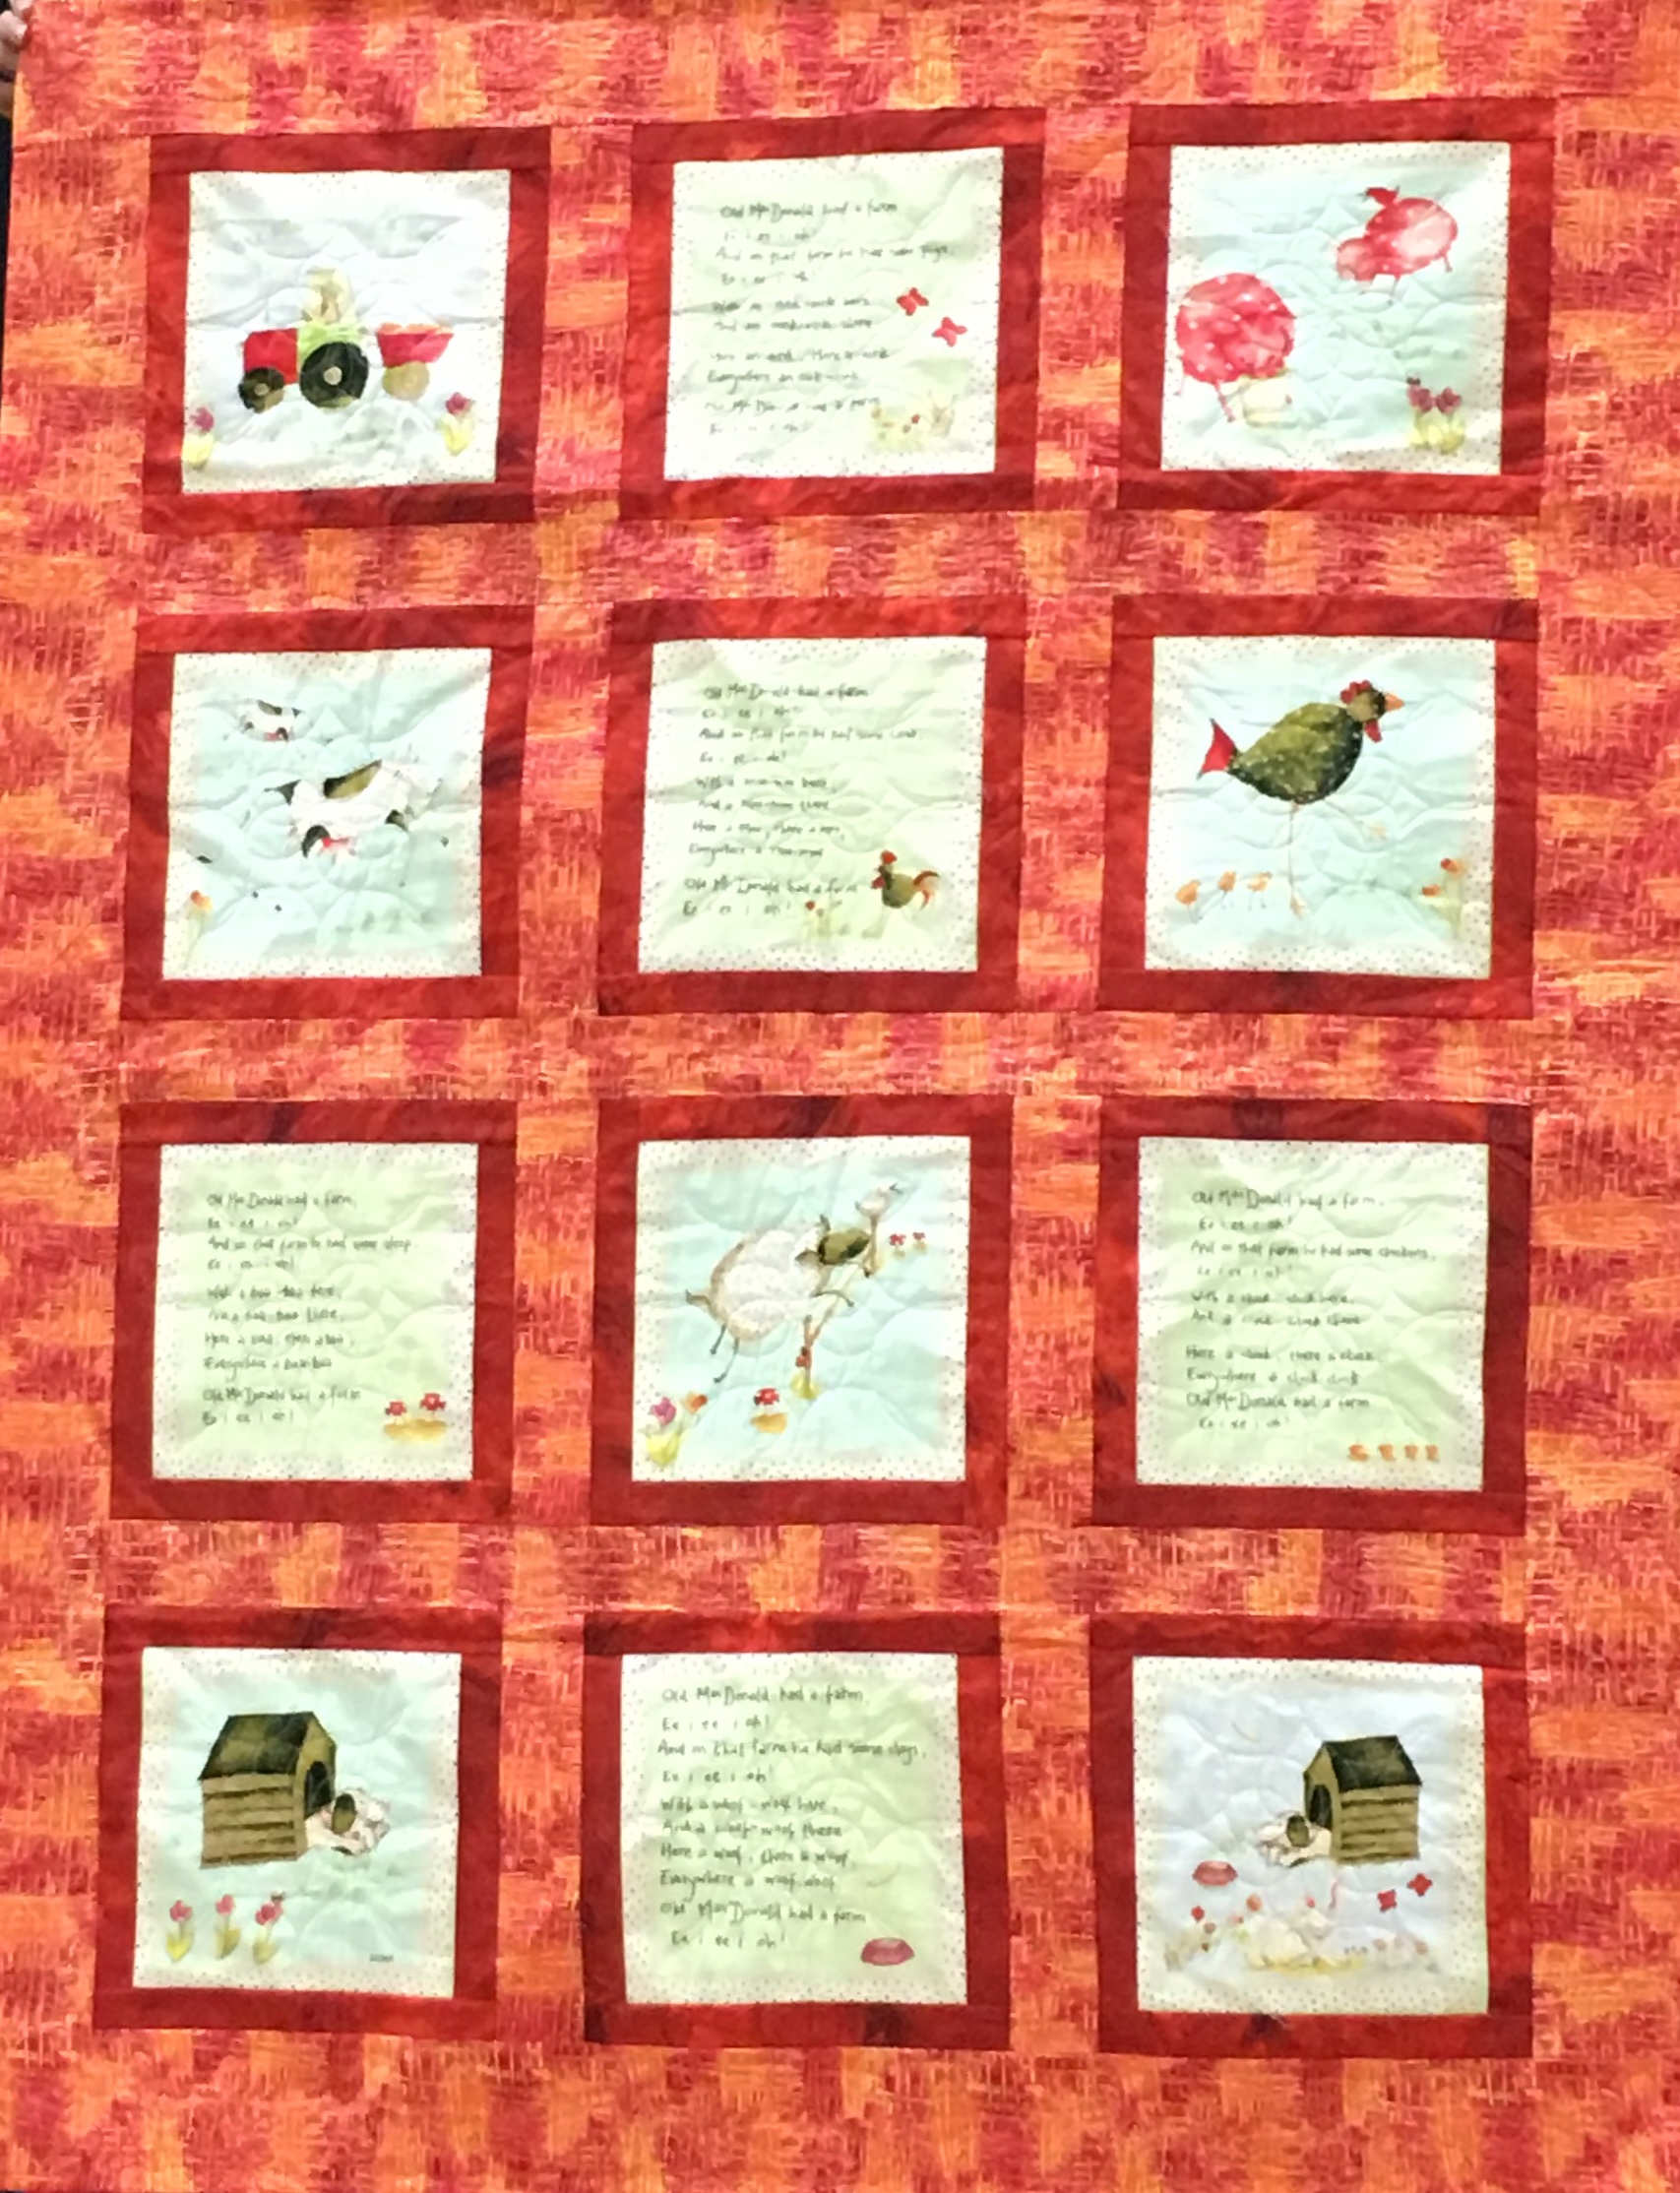 Storybook Panel Quilt